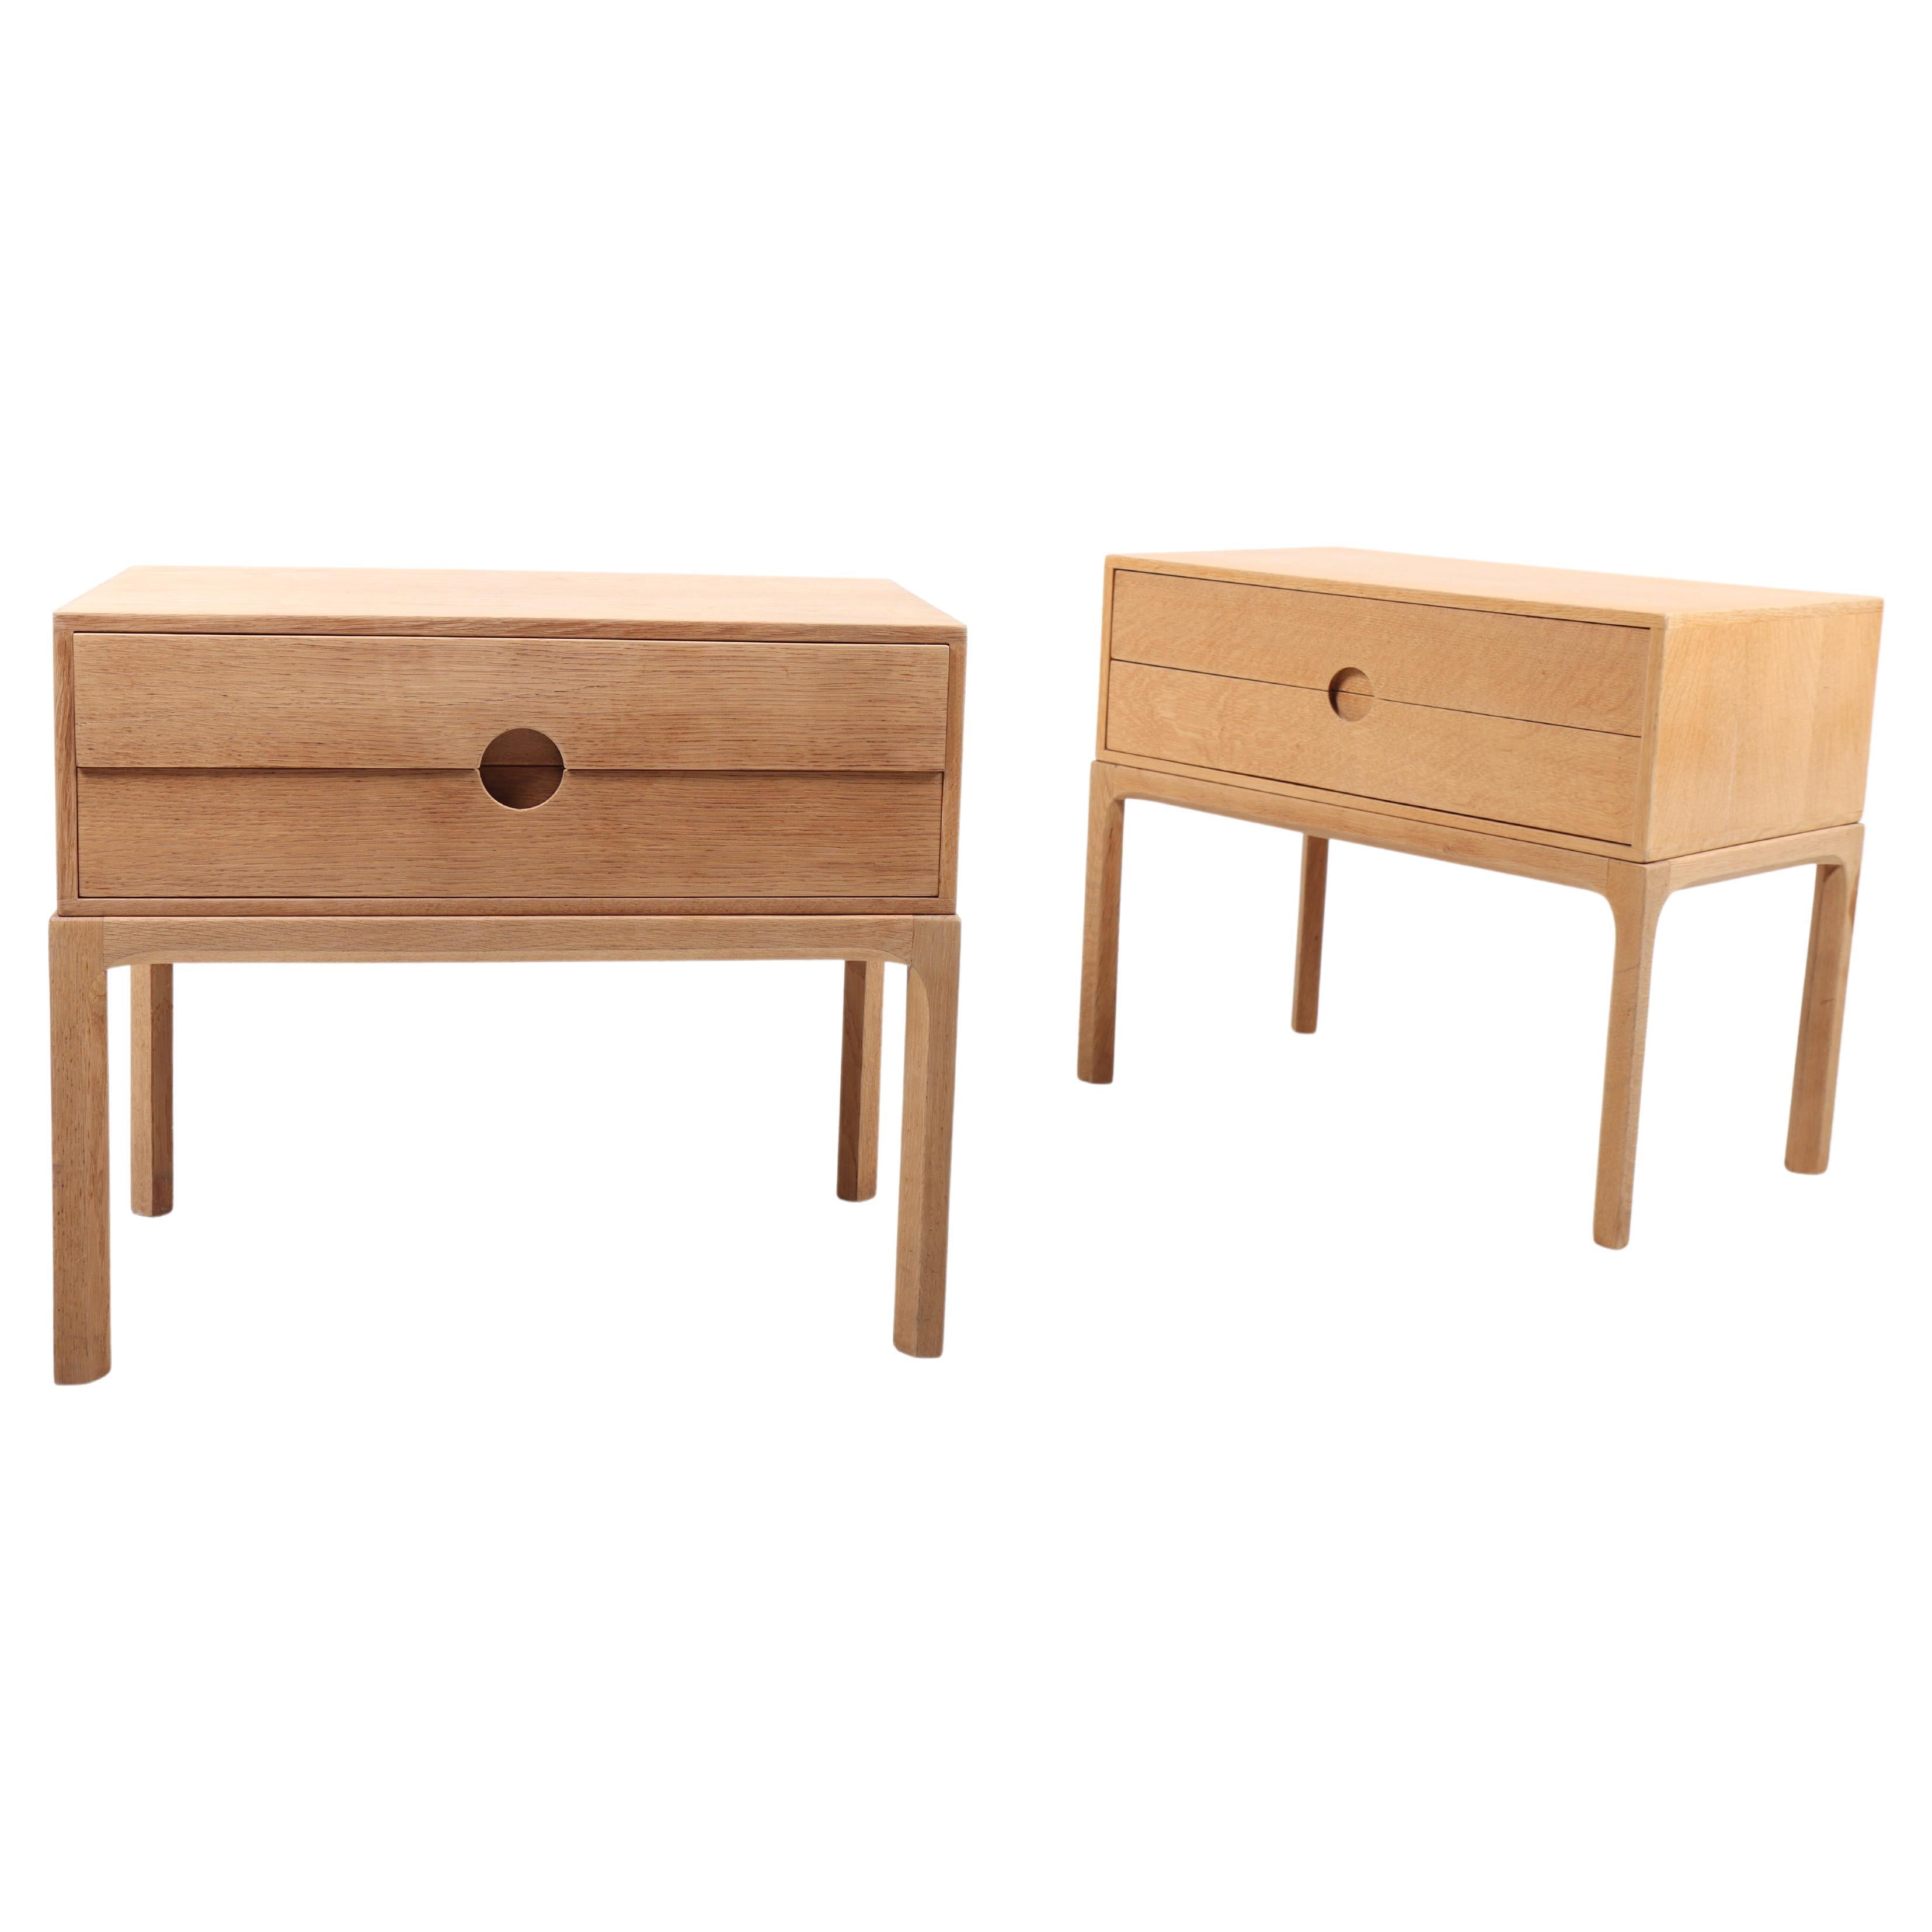 Pair of chest of drawers in oak. Designed by Kai Kristiasen and made by Aksel Kjærsgaard cabinetmakers. Great original condition.